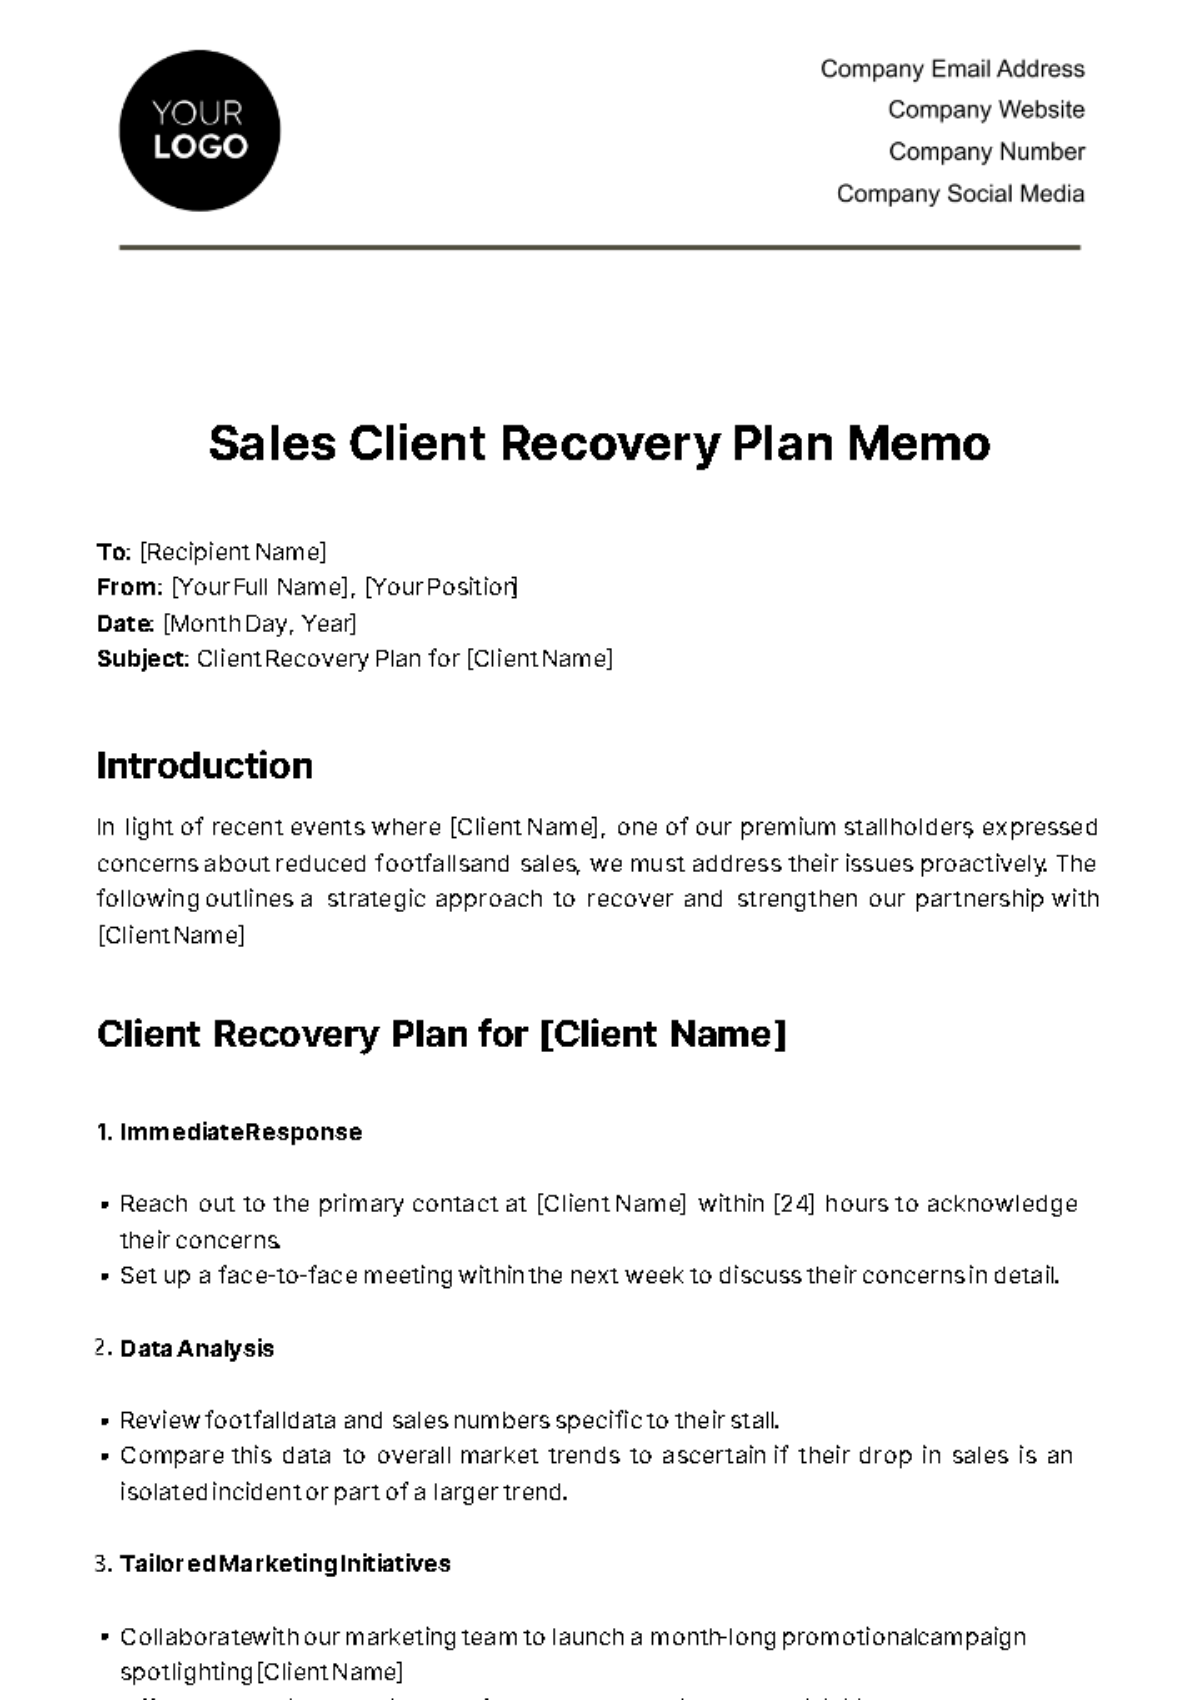 Free Sales Client Recovery Plan Memo Template